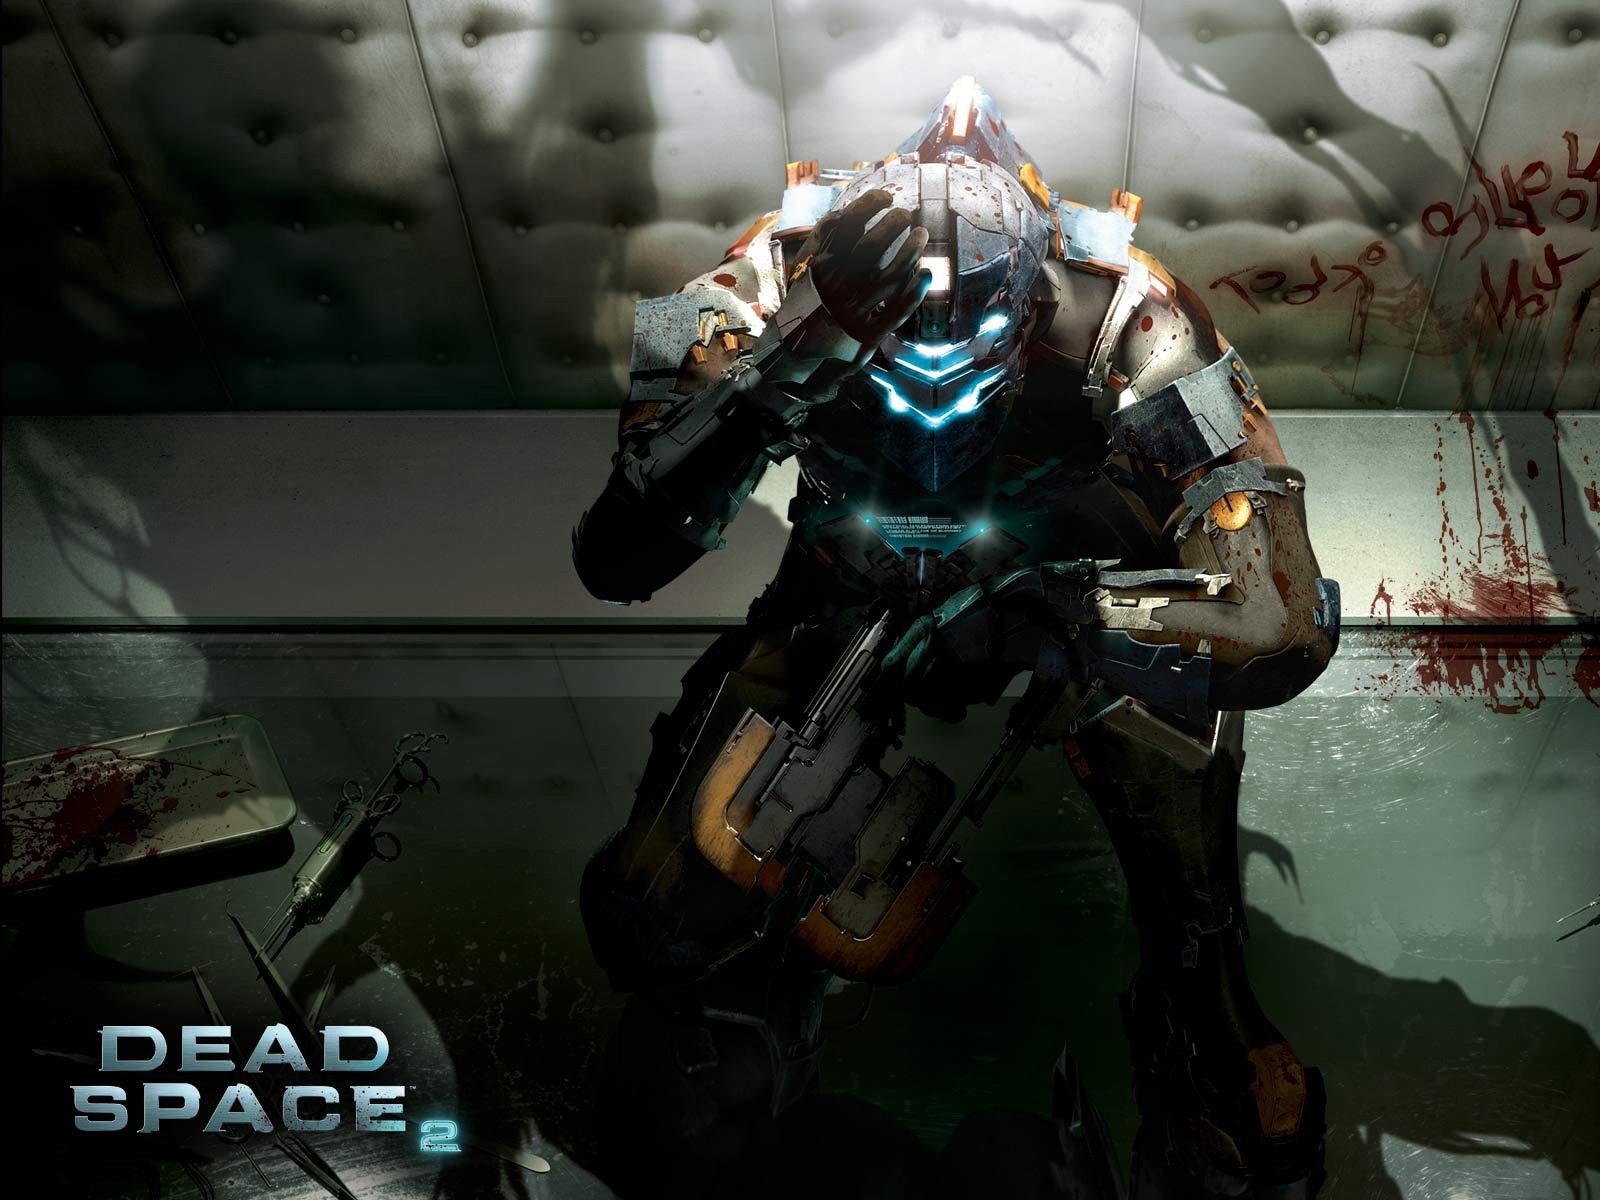 Dead Space 2 Character for 1600 x 1200 resolution